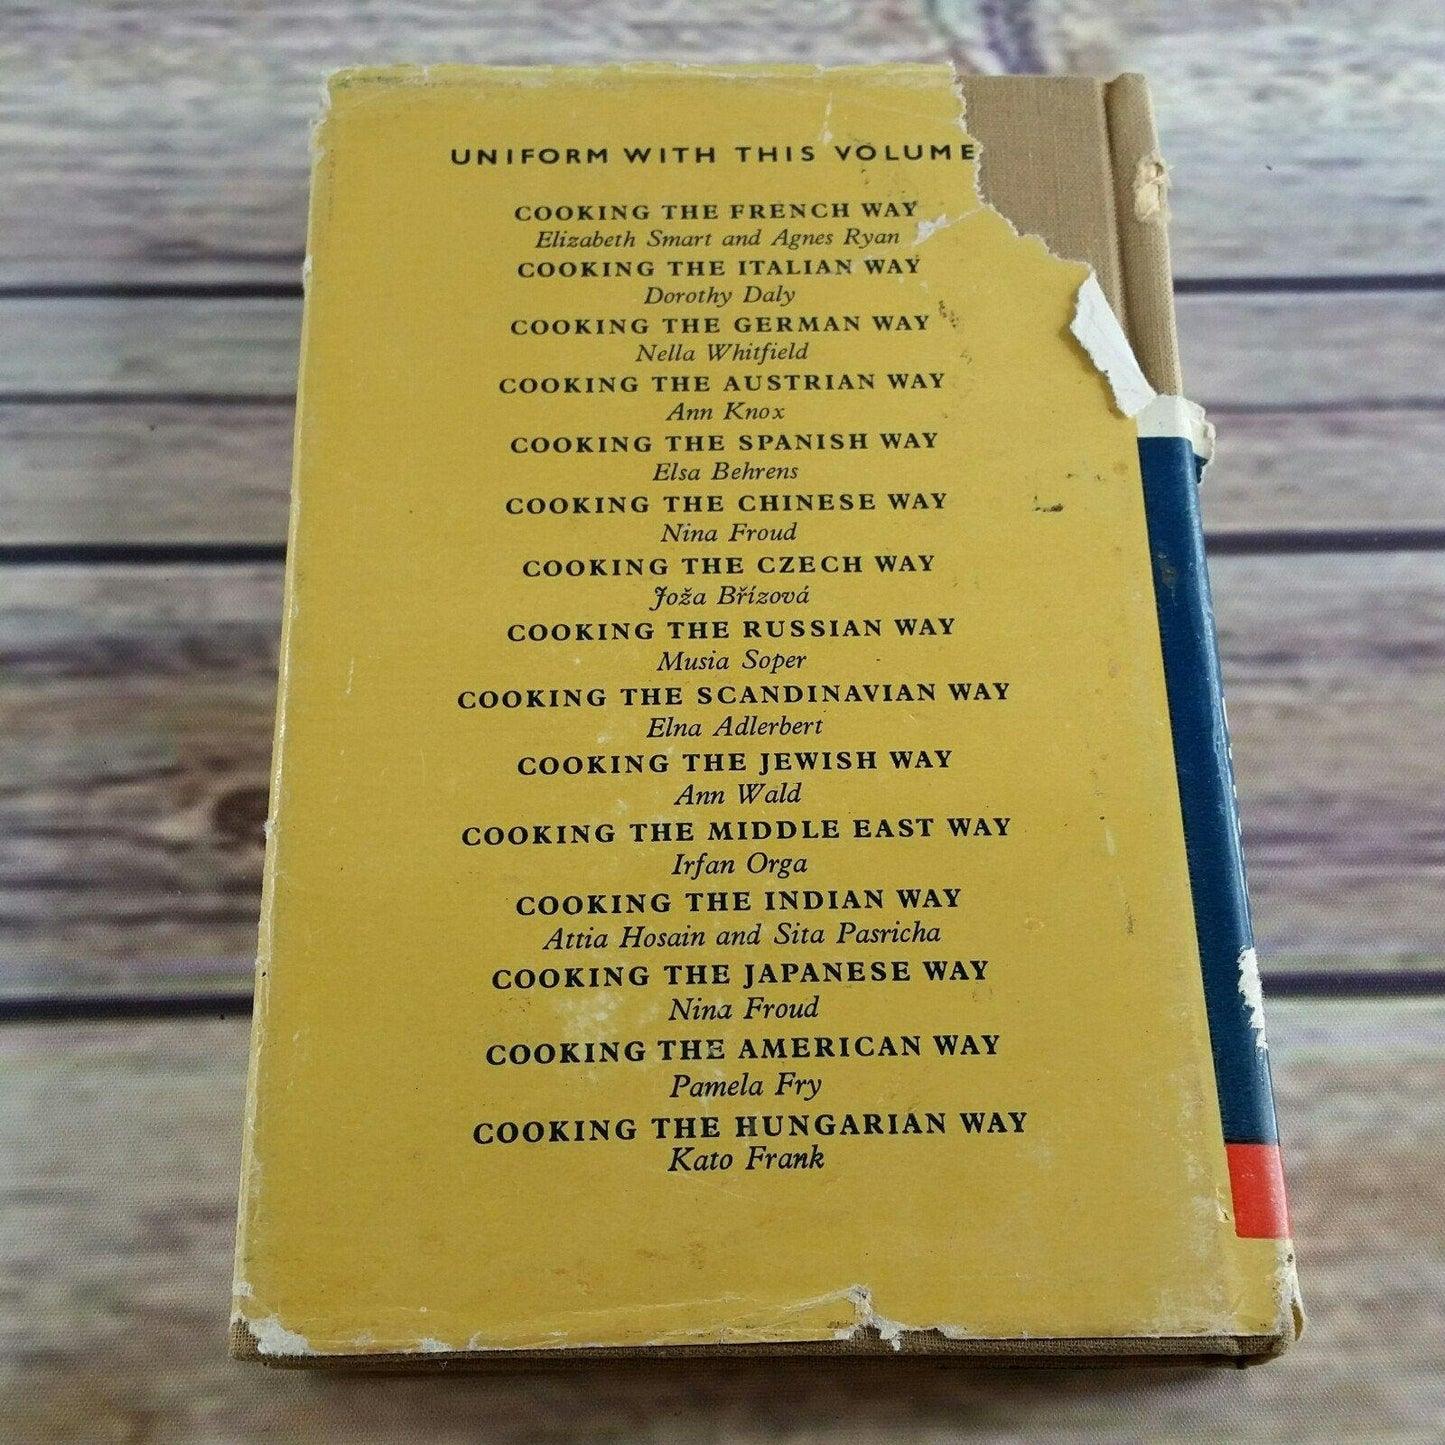 Vtg British Cookbook Cooking the British Way 1963 Hardcover with Dust Jacket Joan Clibbon Breakfast Soups Fish Meat Pastry and more